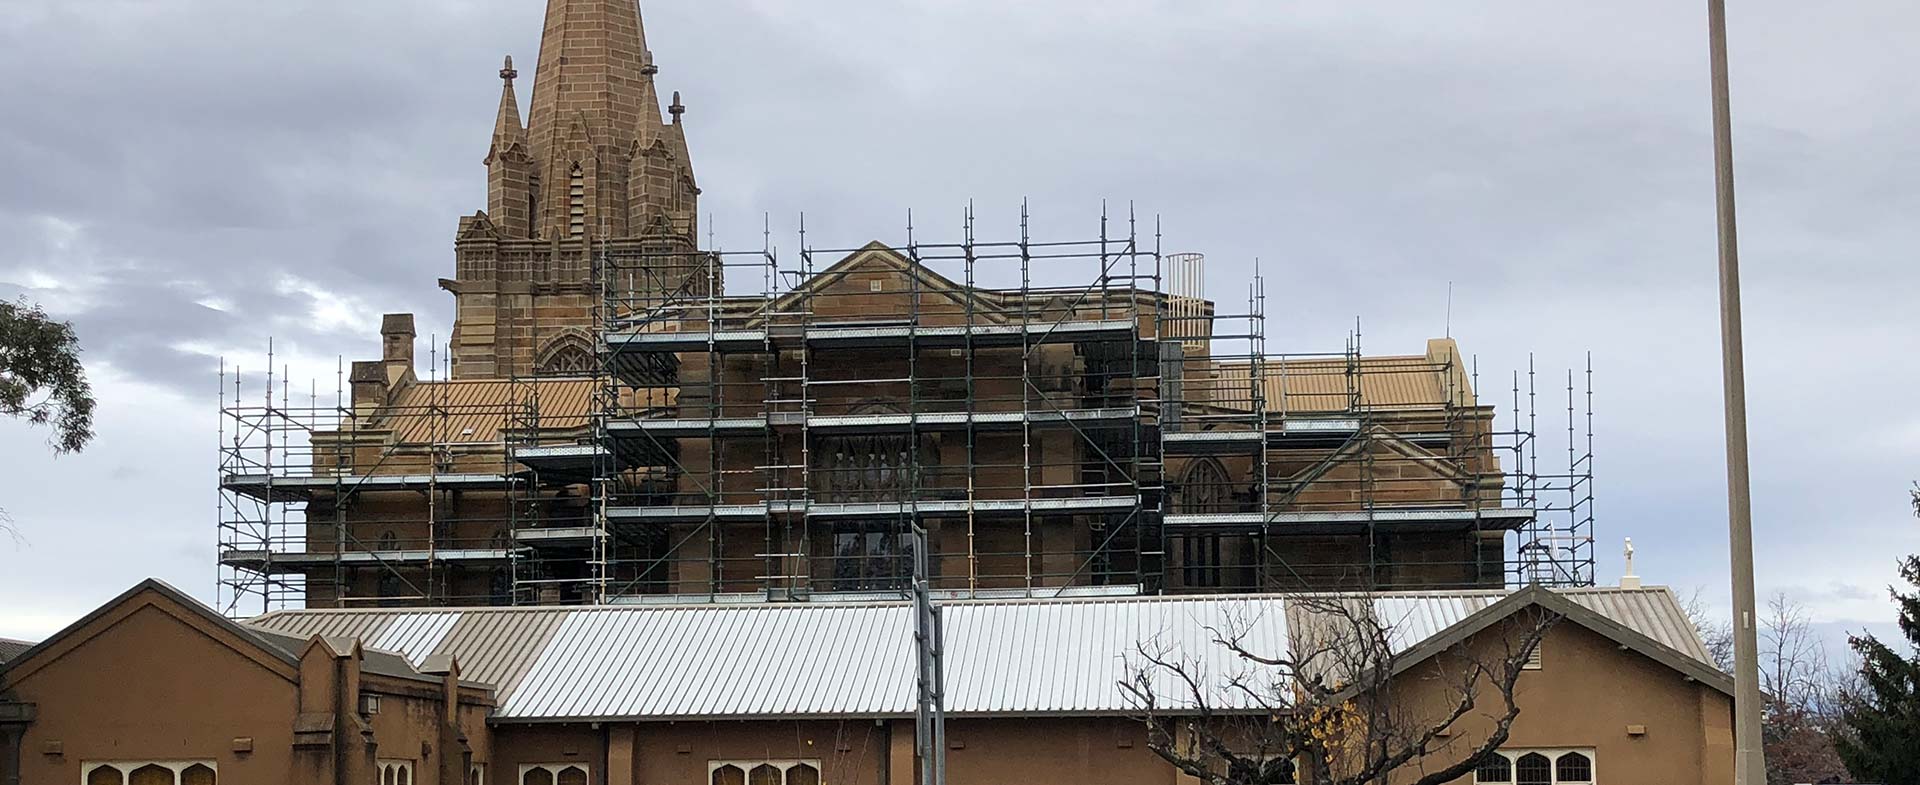 We make residential scaffolding hire easy - helping your project to complete stress free